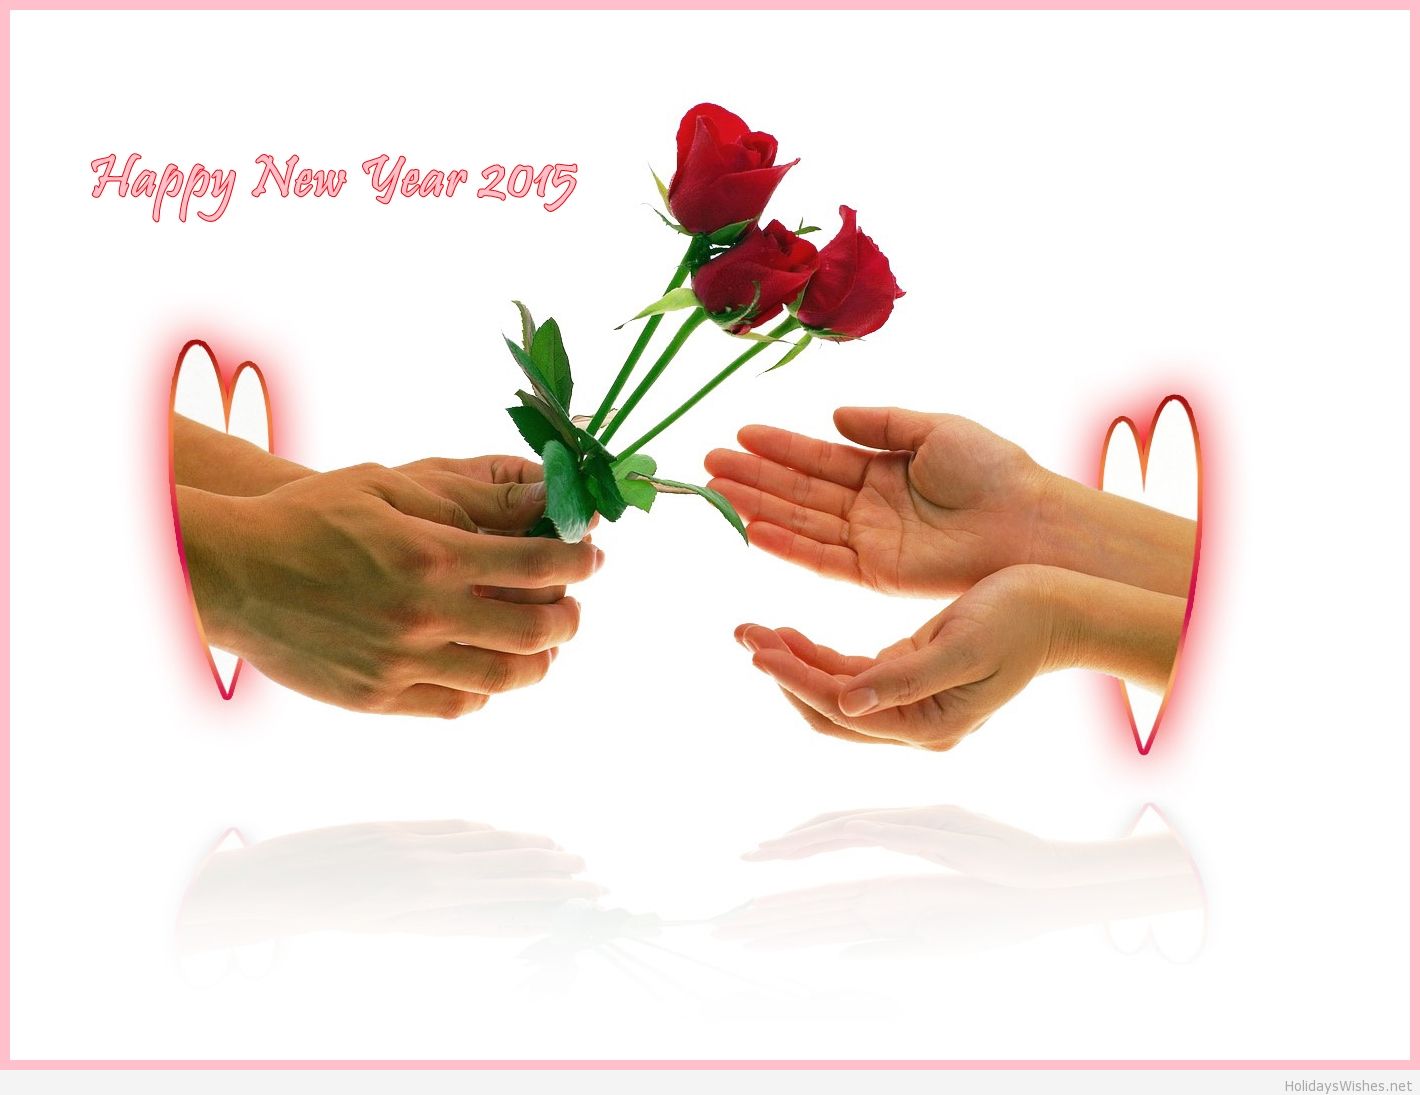 Happy New Year Image HD Background Wallpaper